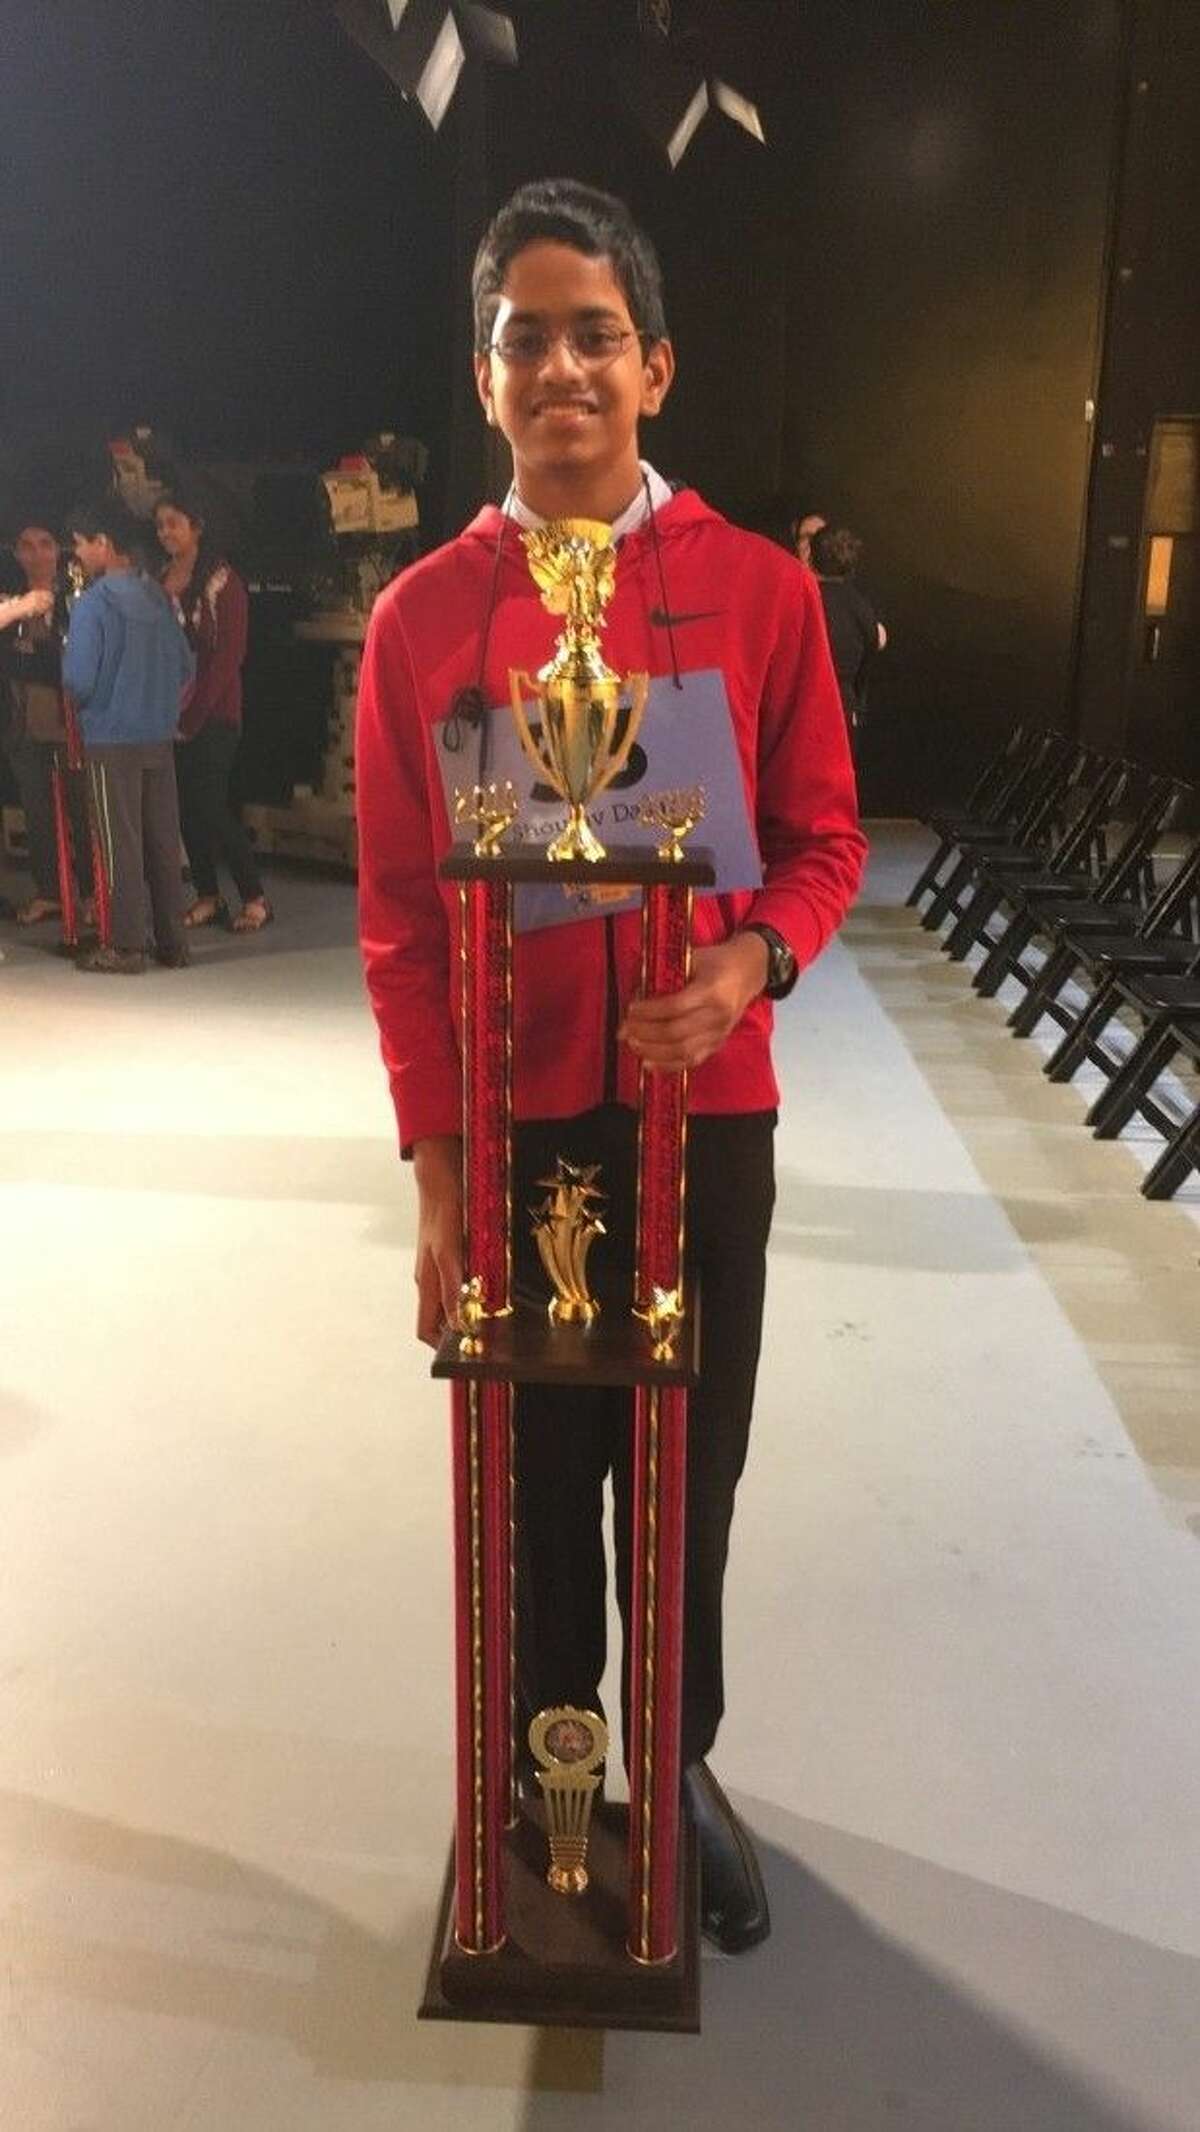 Shourav Dasari, a McCullough Junior High seventh-grader, poses with his trophy after winning the 2016 Houston Public Media Spelling Bee - the second largest in the nation.